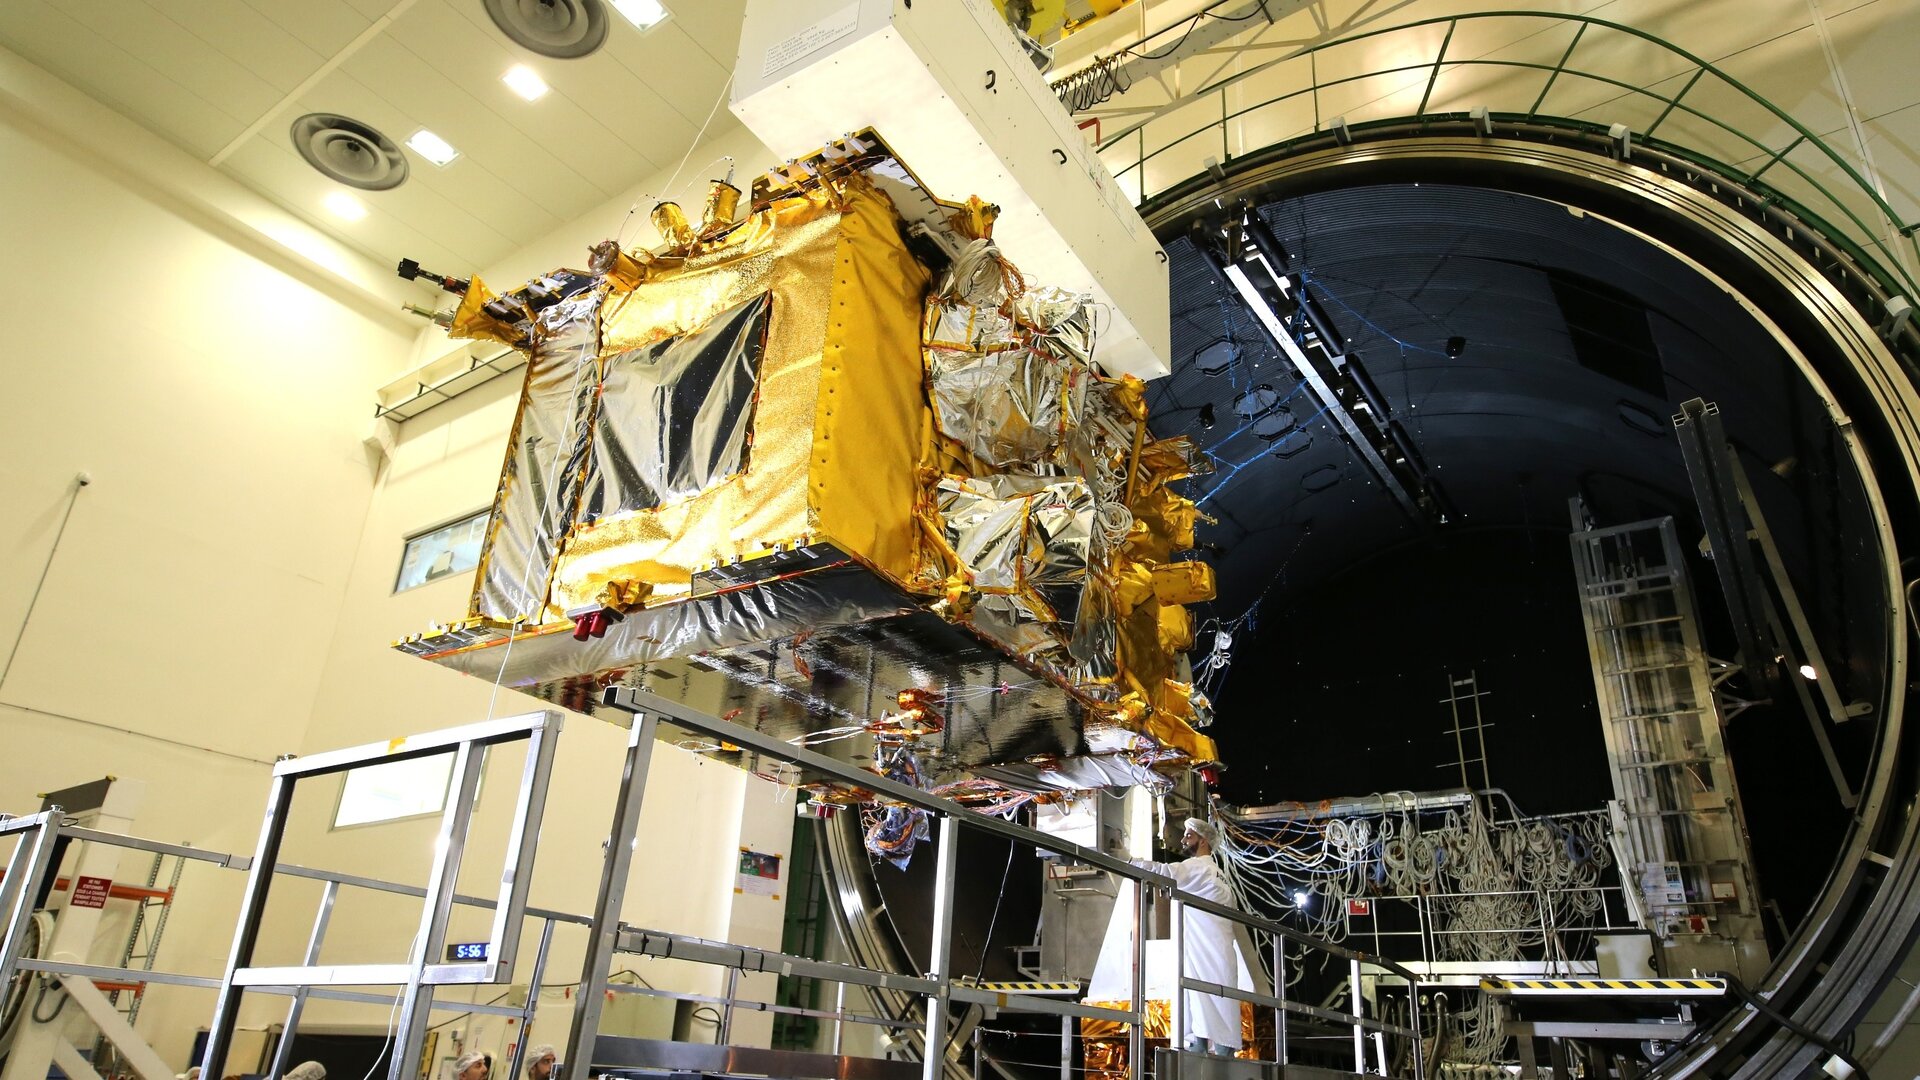 The Eutelsat Quantum spacecraft has been successfully tested in the thermal vacuum facility at Airbus in Toulouse